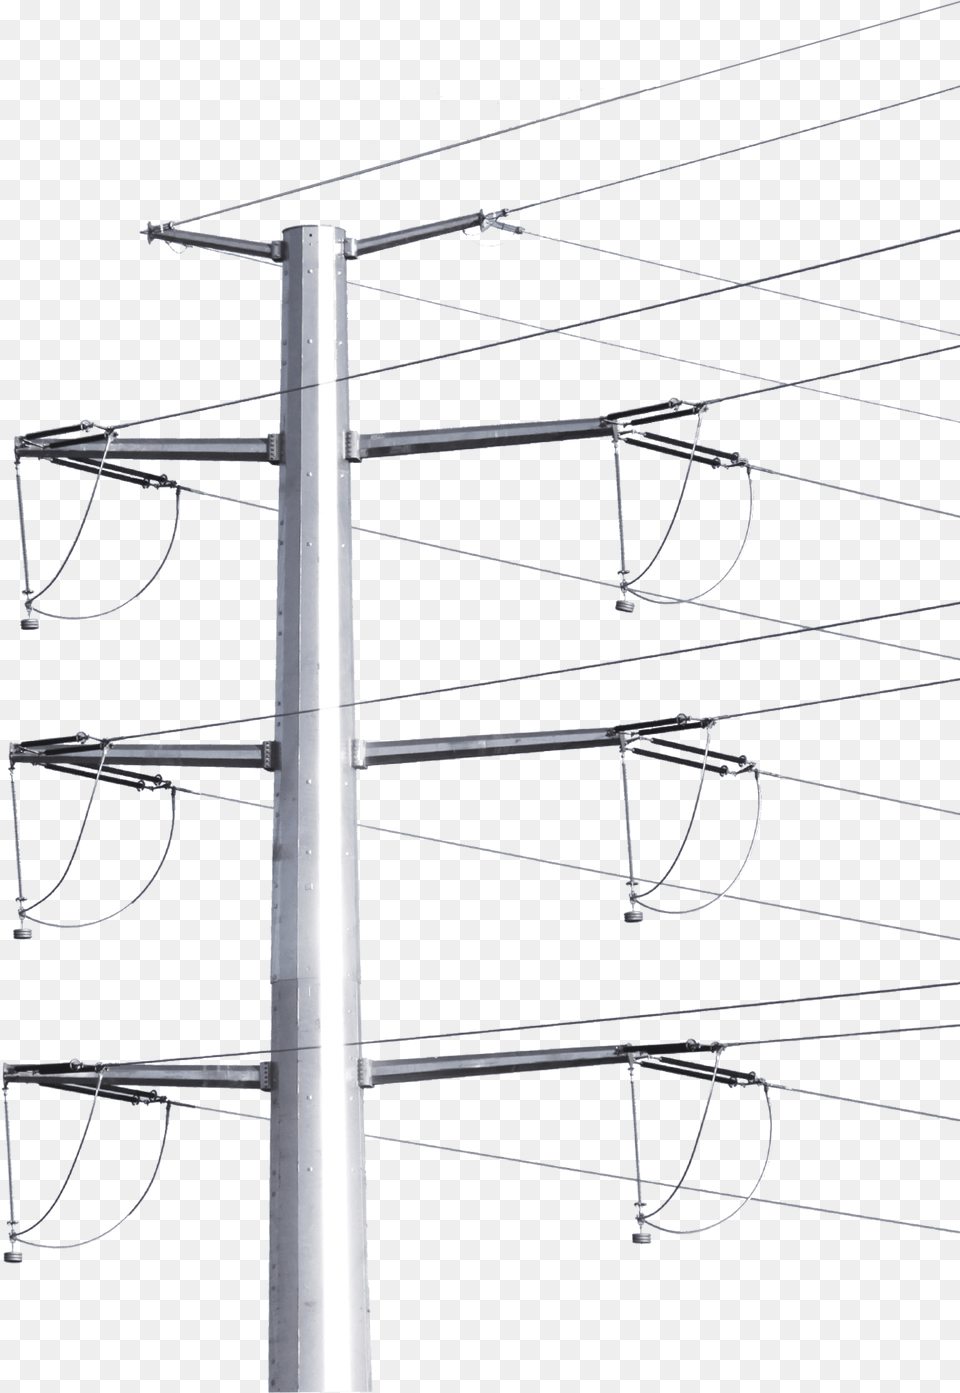 Image Overhead Power Line, Utility Pole, Cable, Power Lines, Electric Transmission Tower Png